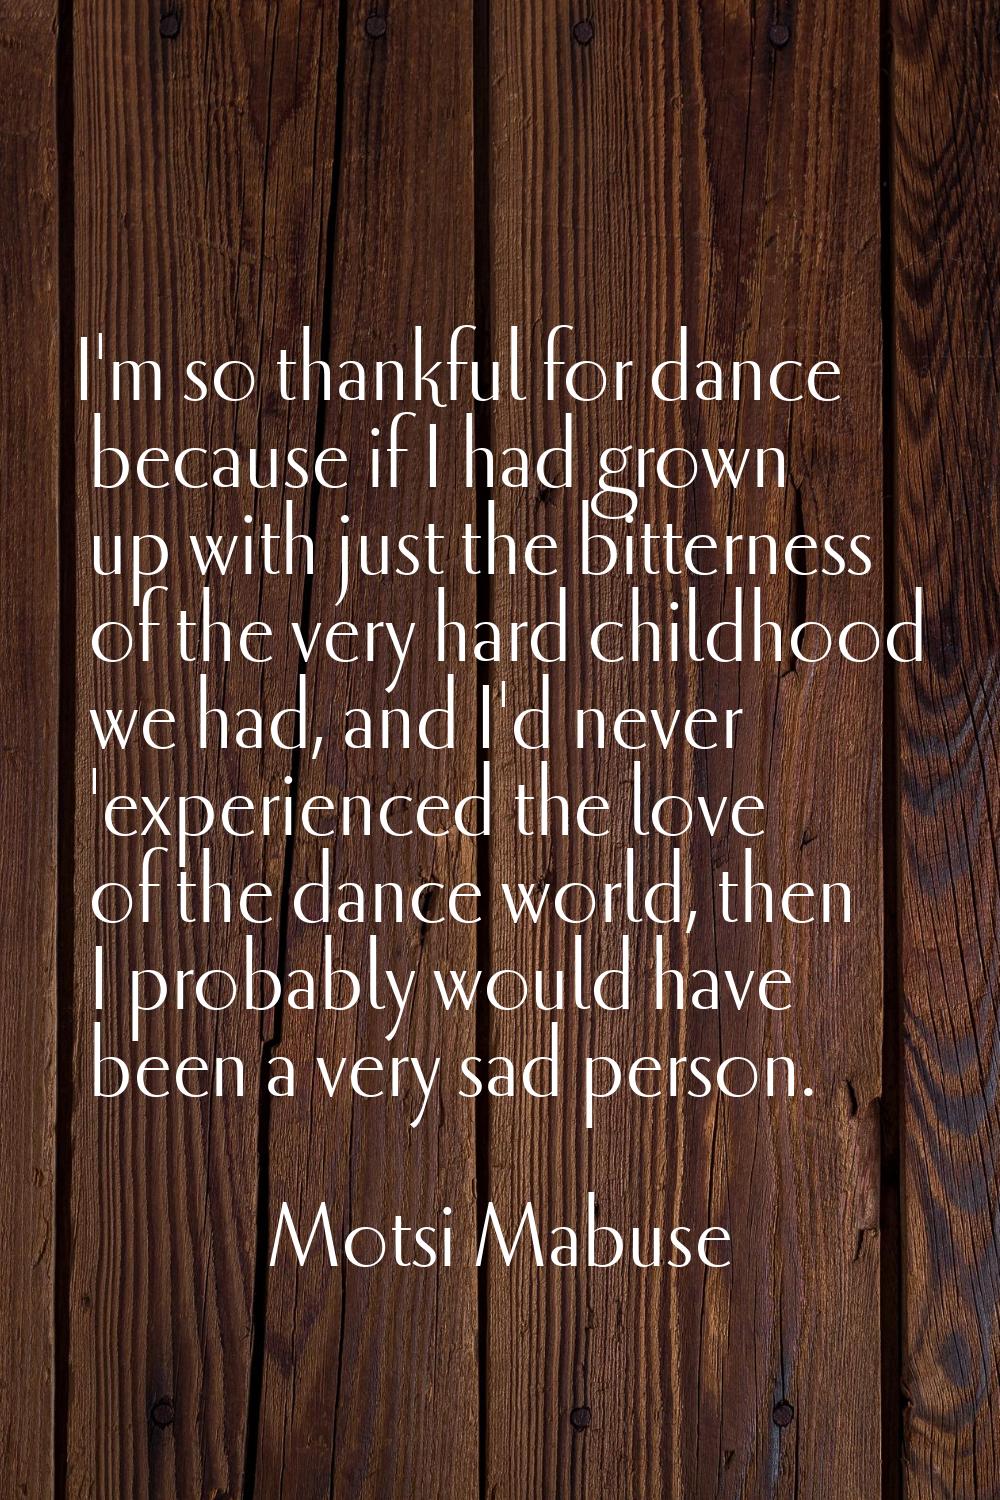 I'm so thankful for dance because if I had grown up with just the bitterness of the very hard child